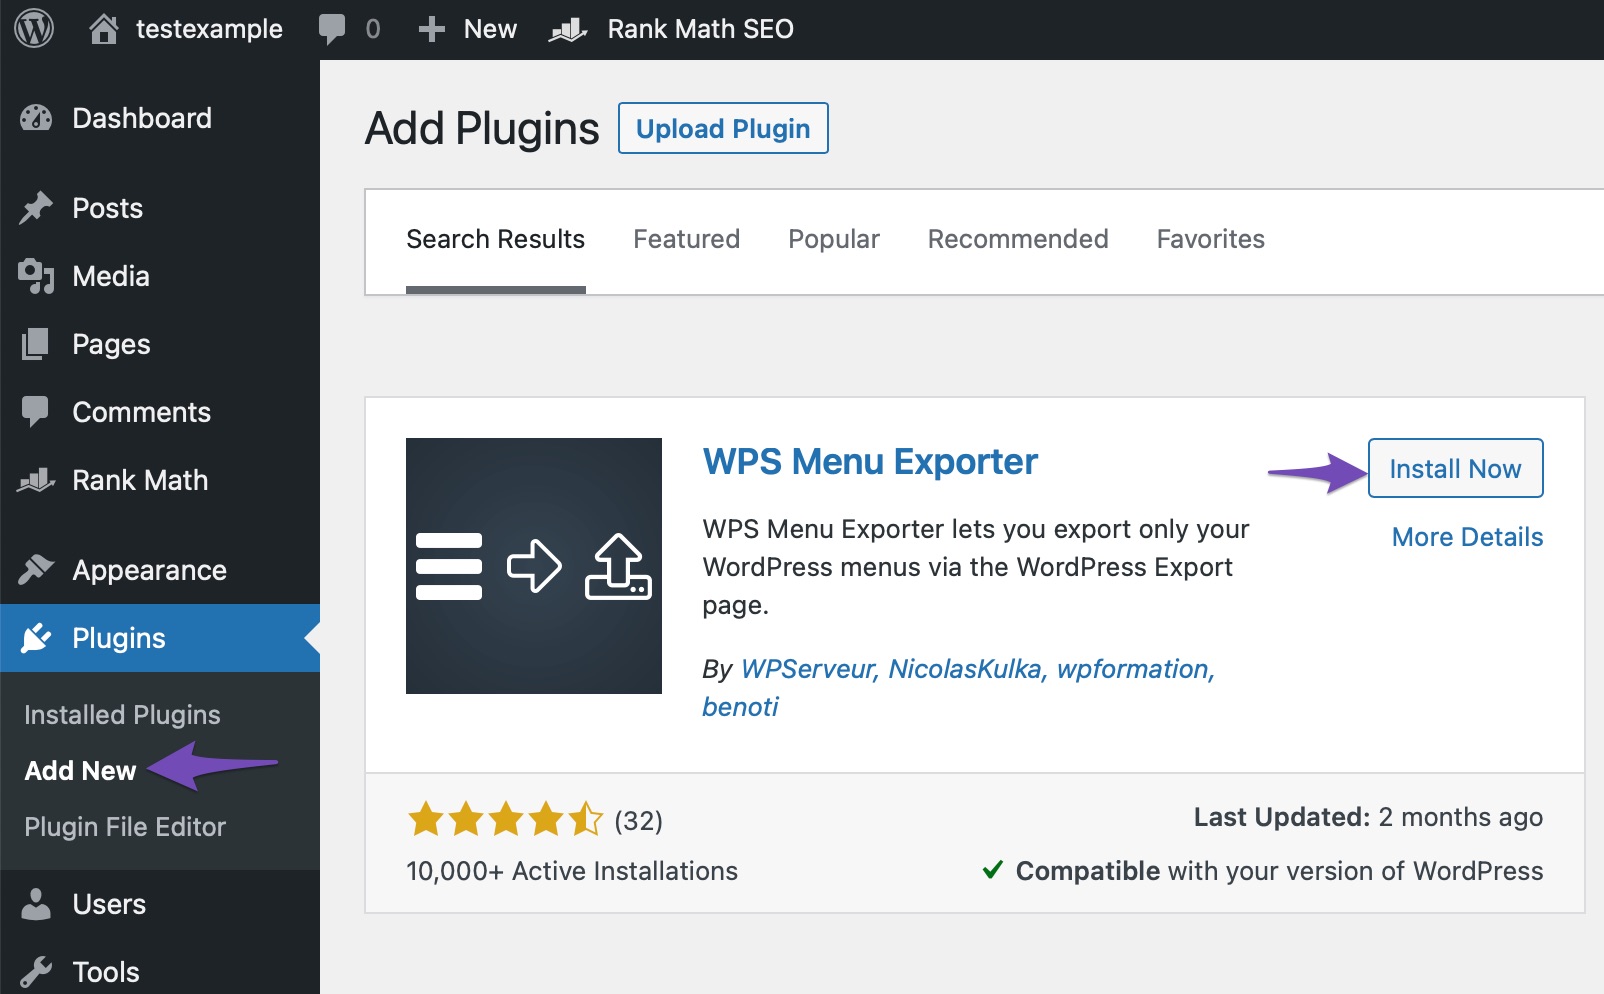 install and activate the WPS Menu Exporter plugin